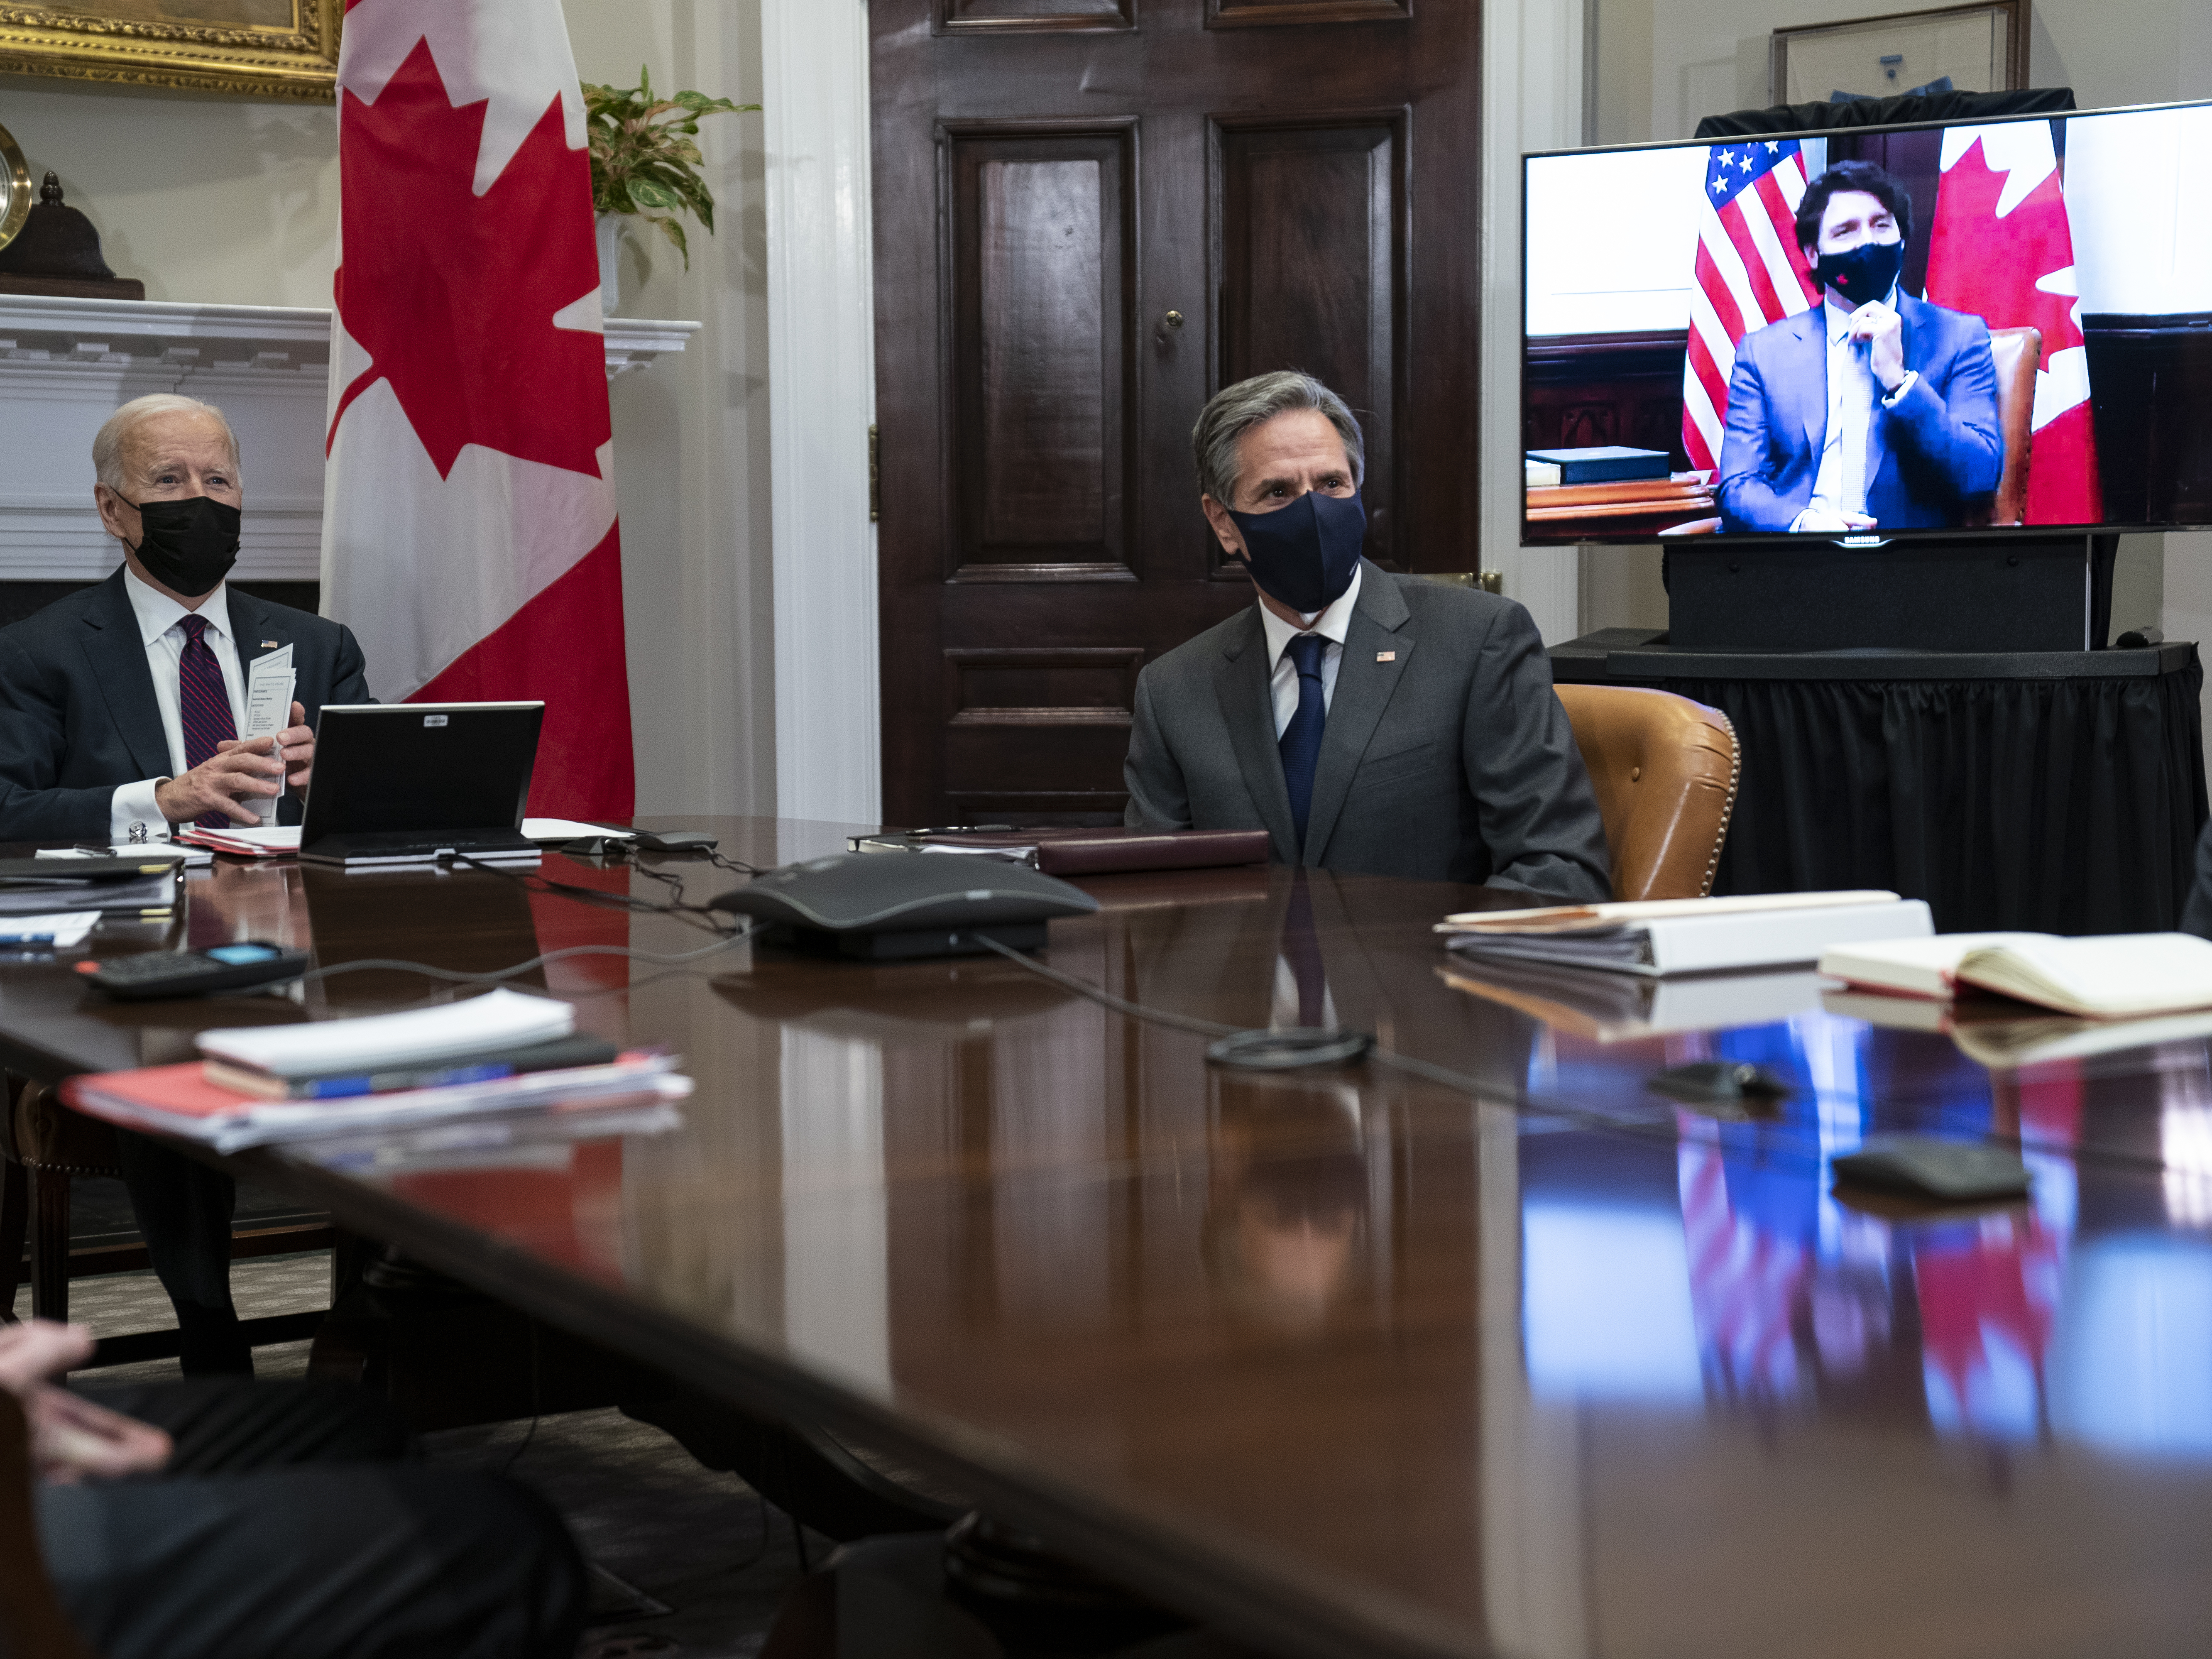 President Biden and his team, including Secretary of State Antony Blinken, met virtually with Canadian Prime Minister Justin Trudeau in the Roosevelt Room of the White House. CREDIT: Evan Vucci/AP